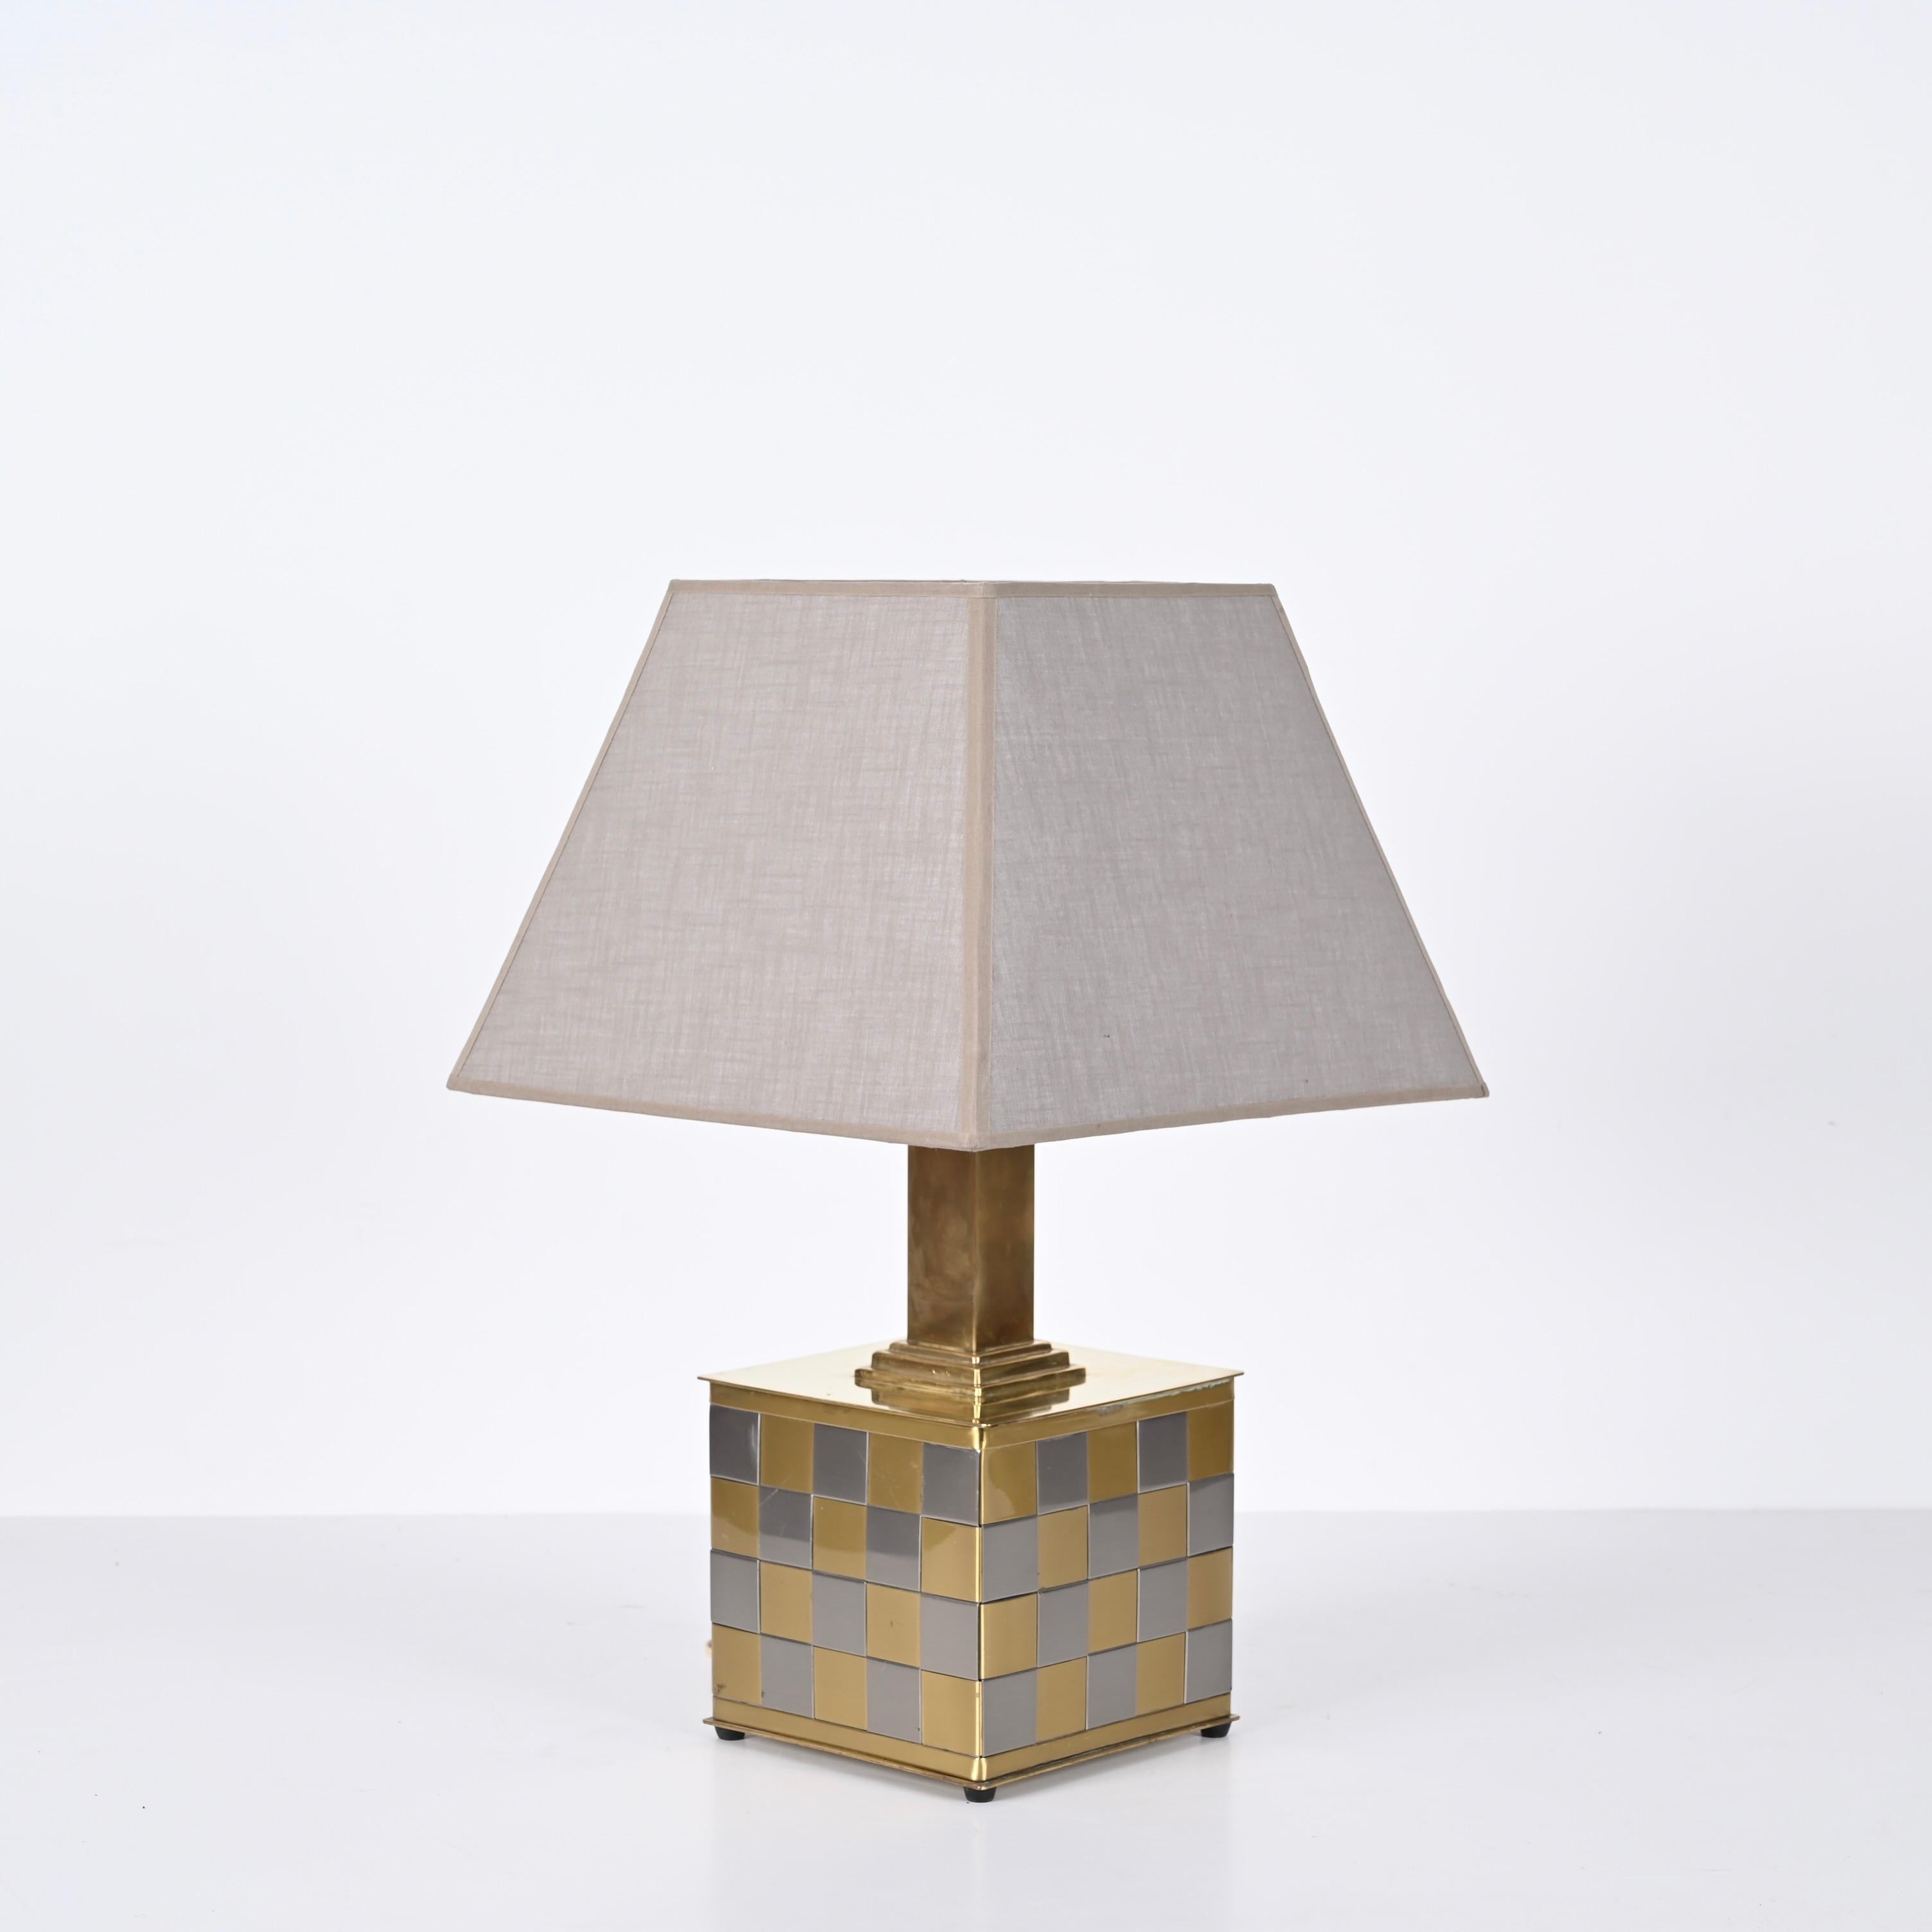 Italian Midcentury Brass and Chrome Table Lamp, Willy Rizzo, Italy 1970s For Sale